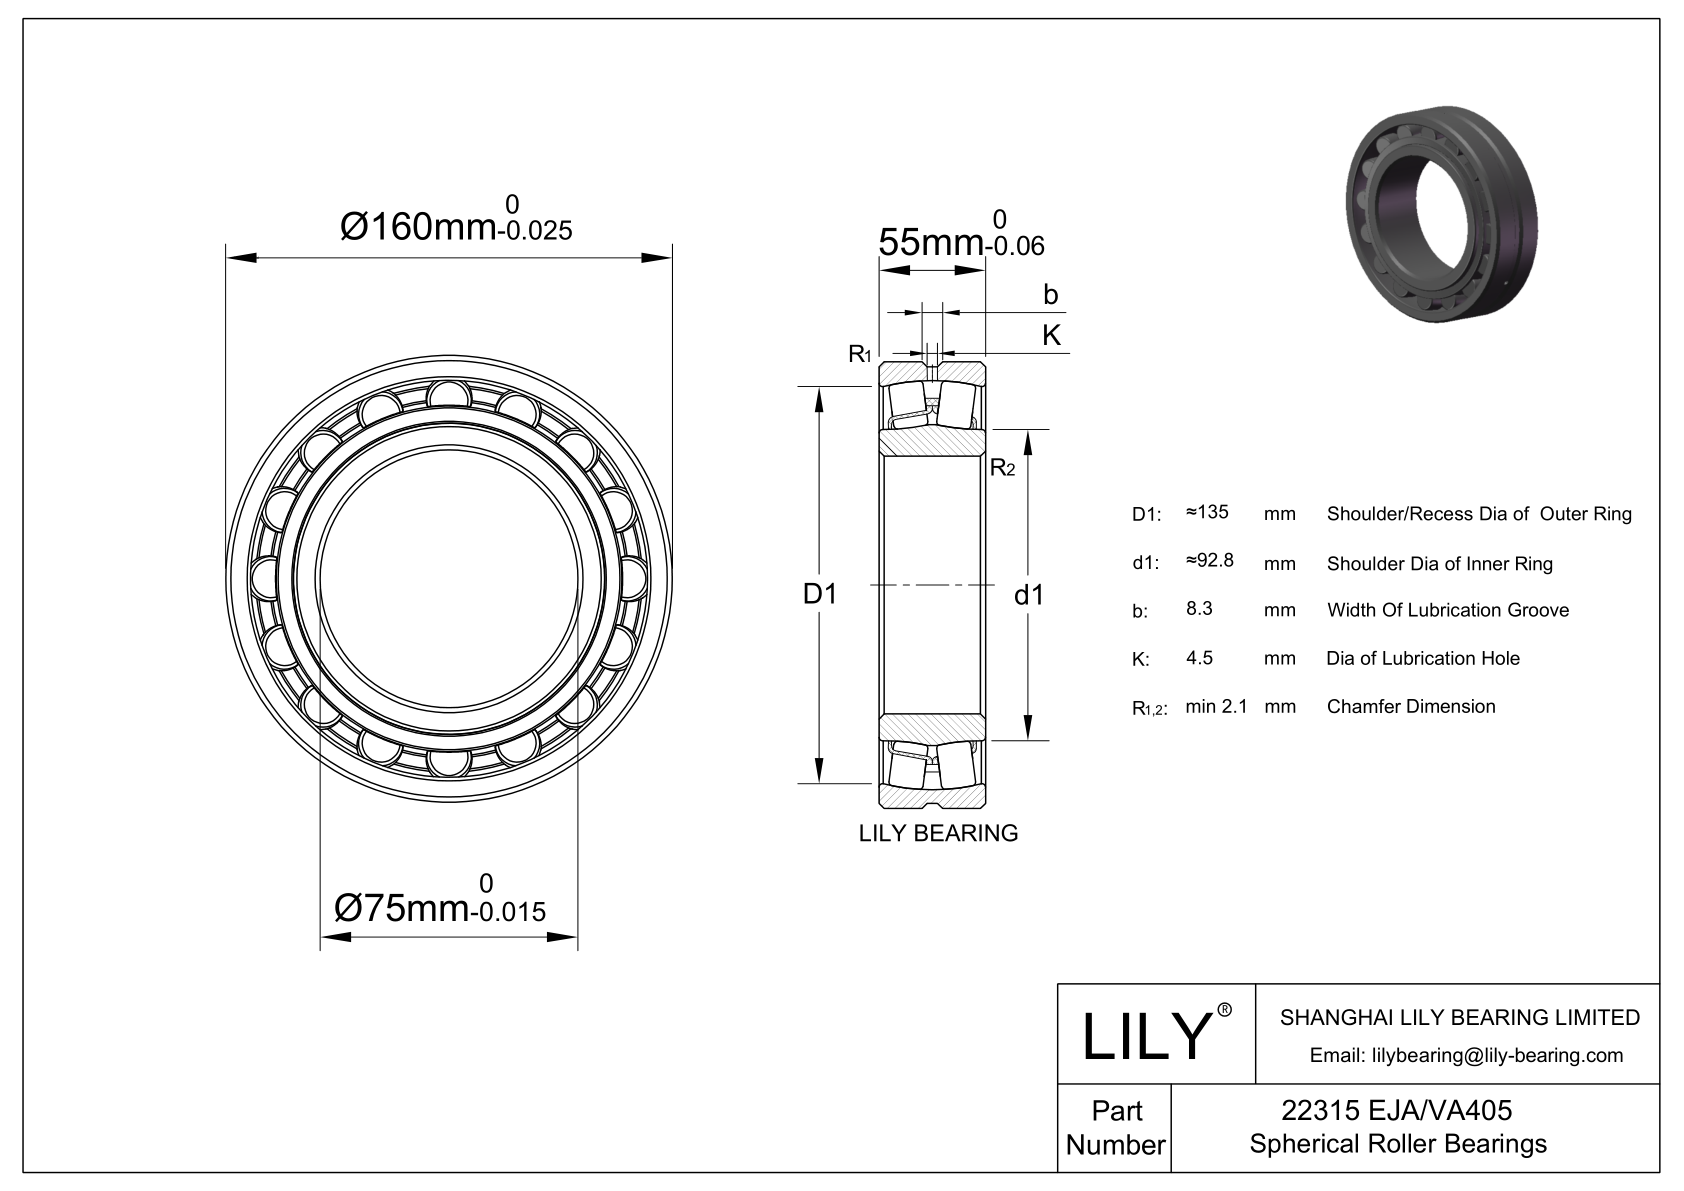 22315 EJA/VA405 Double Row Spherical Roller Bearing cad drawing